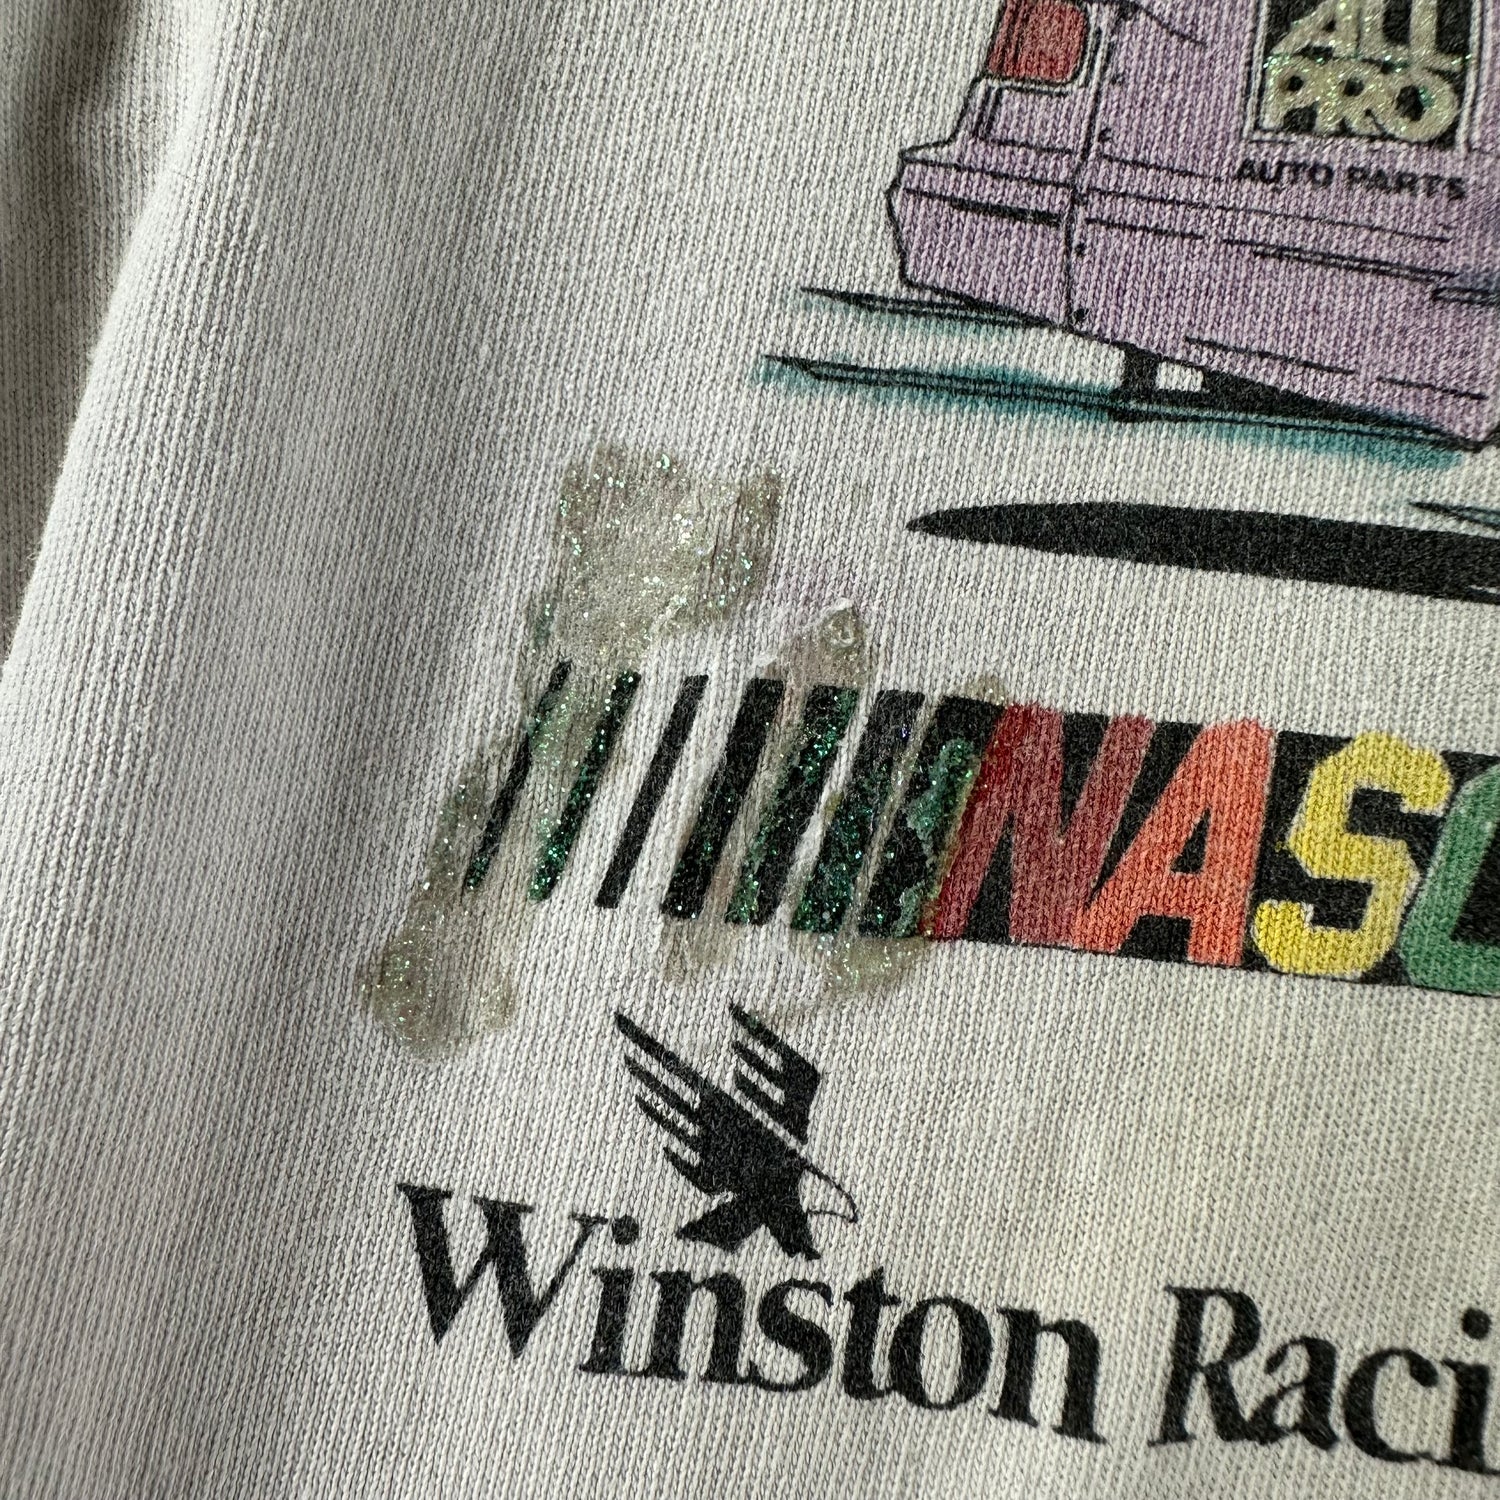 Vintage 1990s NASCAR T-shirt size Small